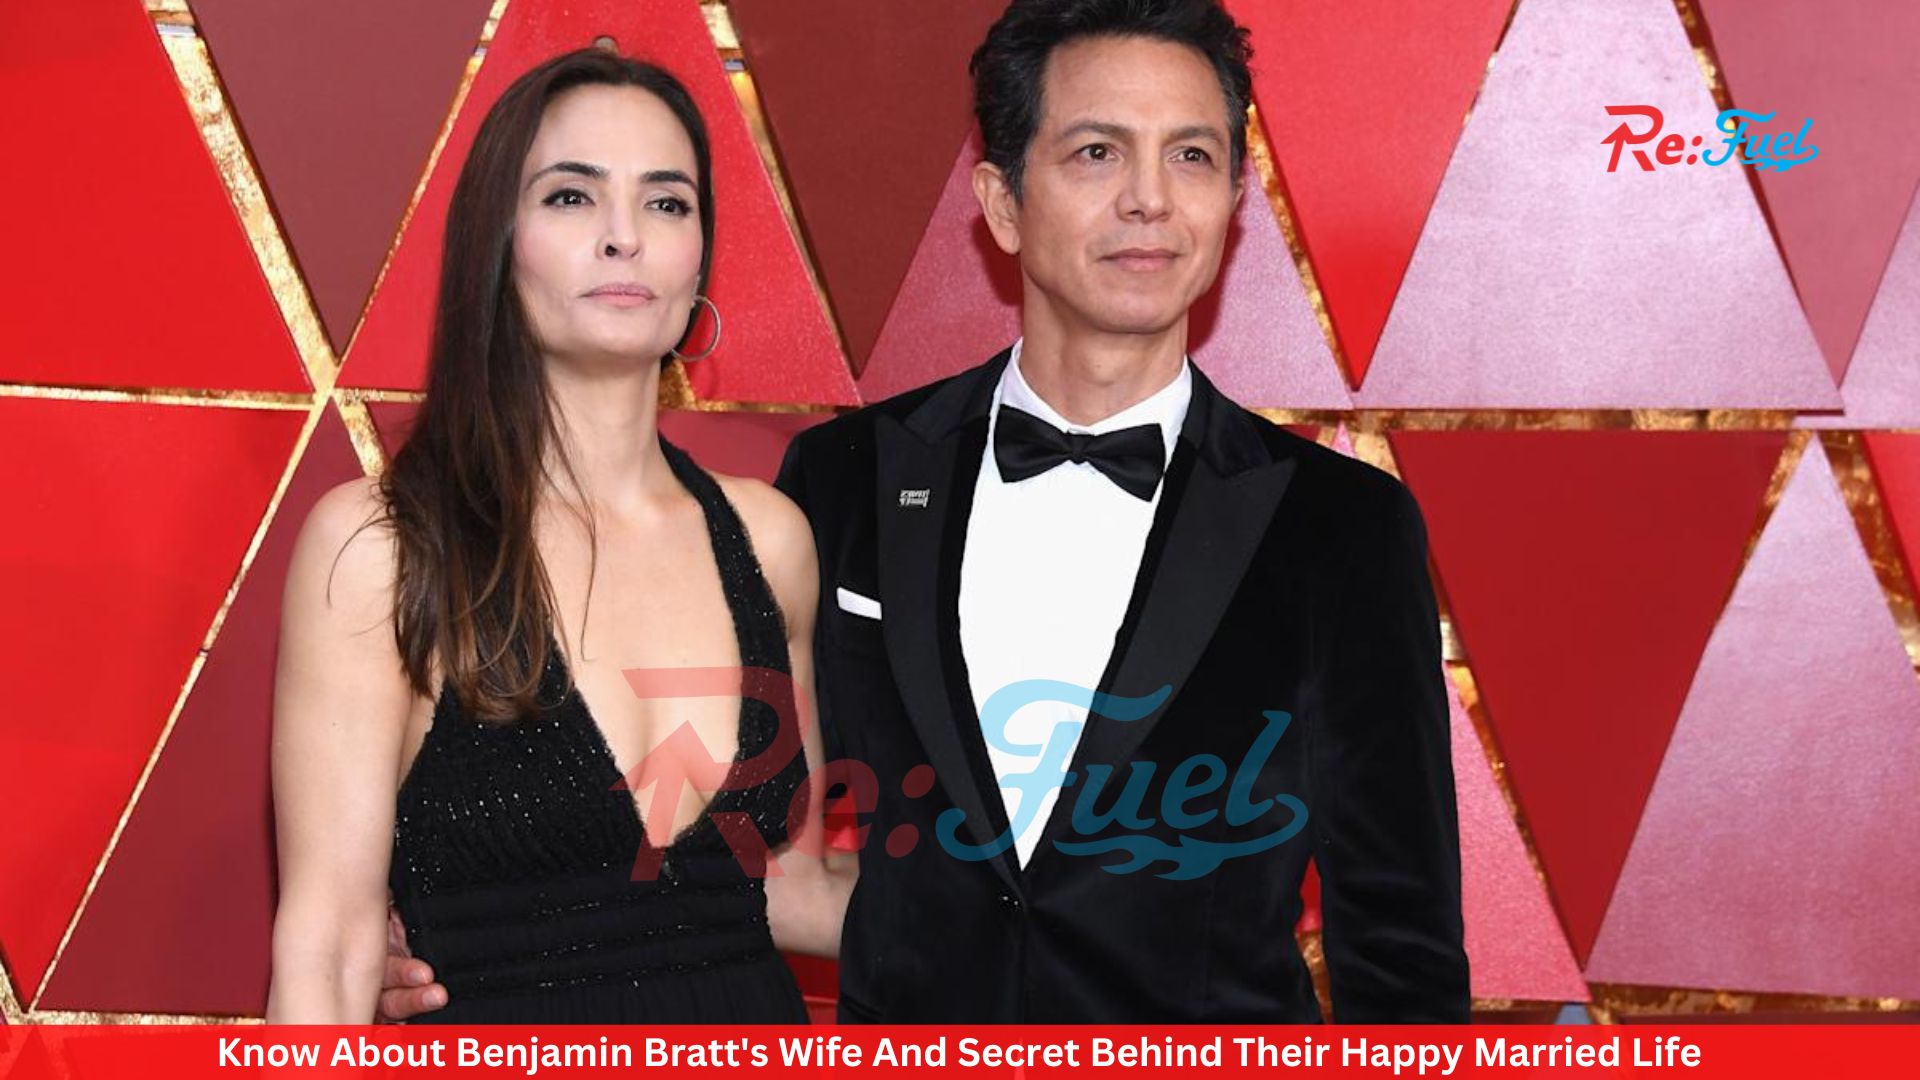 Know About Benjamin Bratt's Wife And Secret Behind Their Happy Married Life